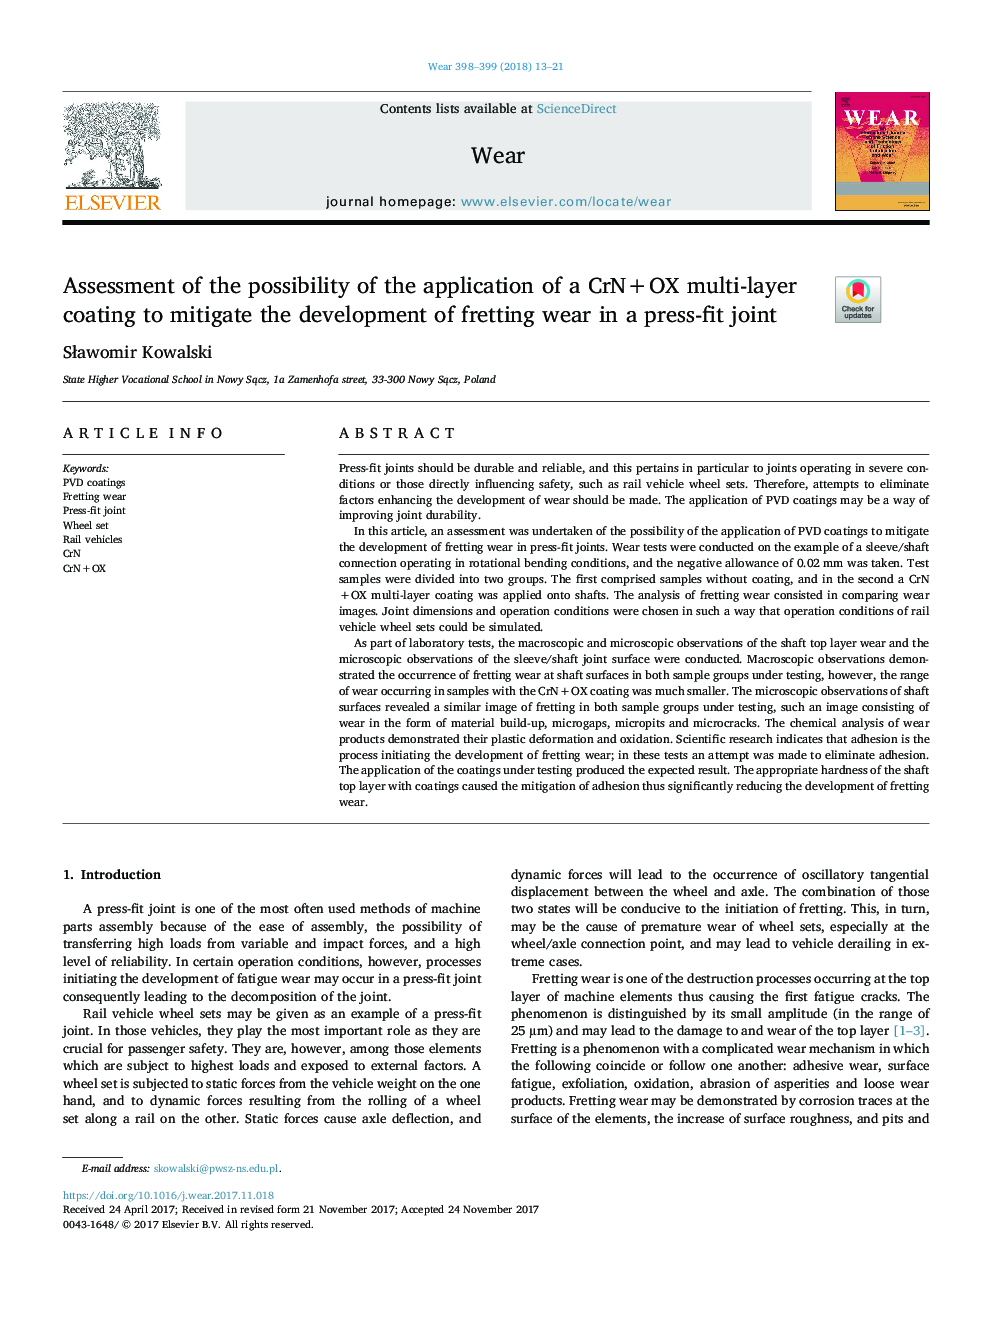 Assessment of the possibility of the application of a CrN+OX multi-layer coating to mitigate the development of fretting wear in a press-fit joint